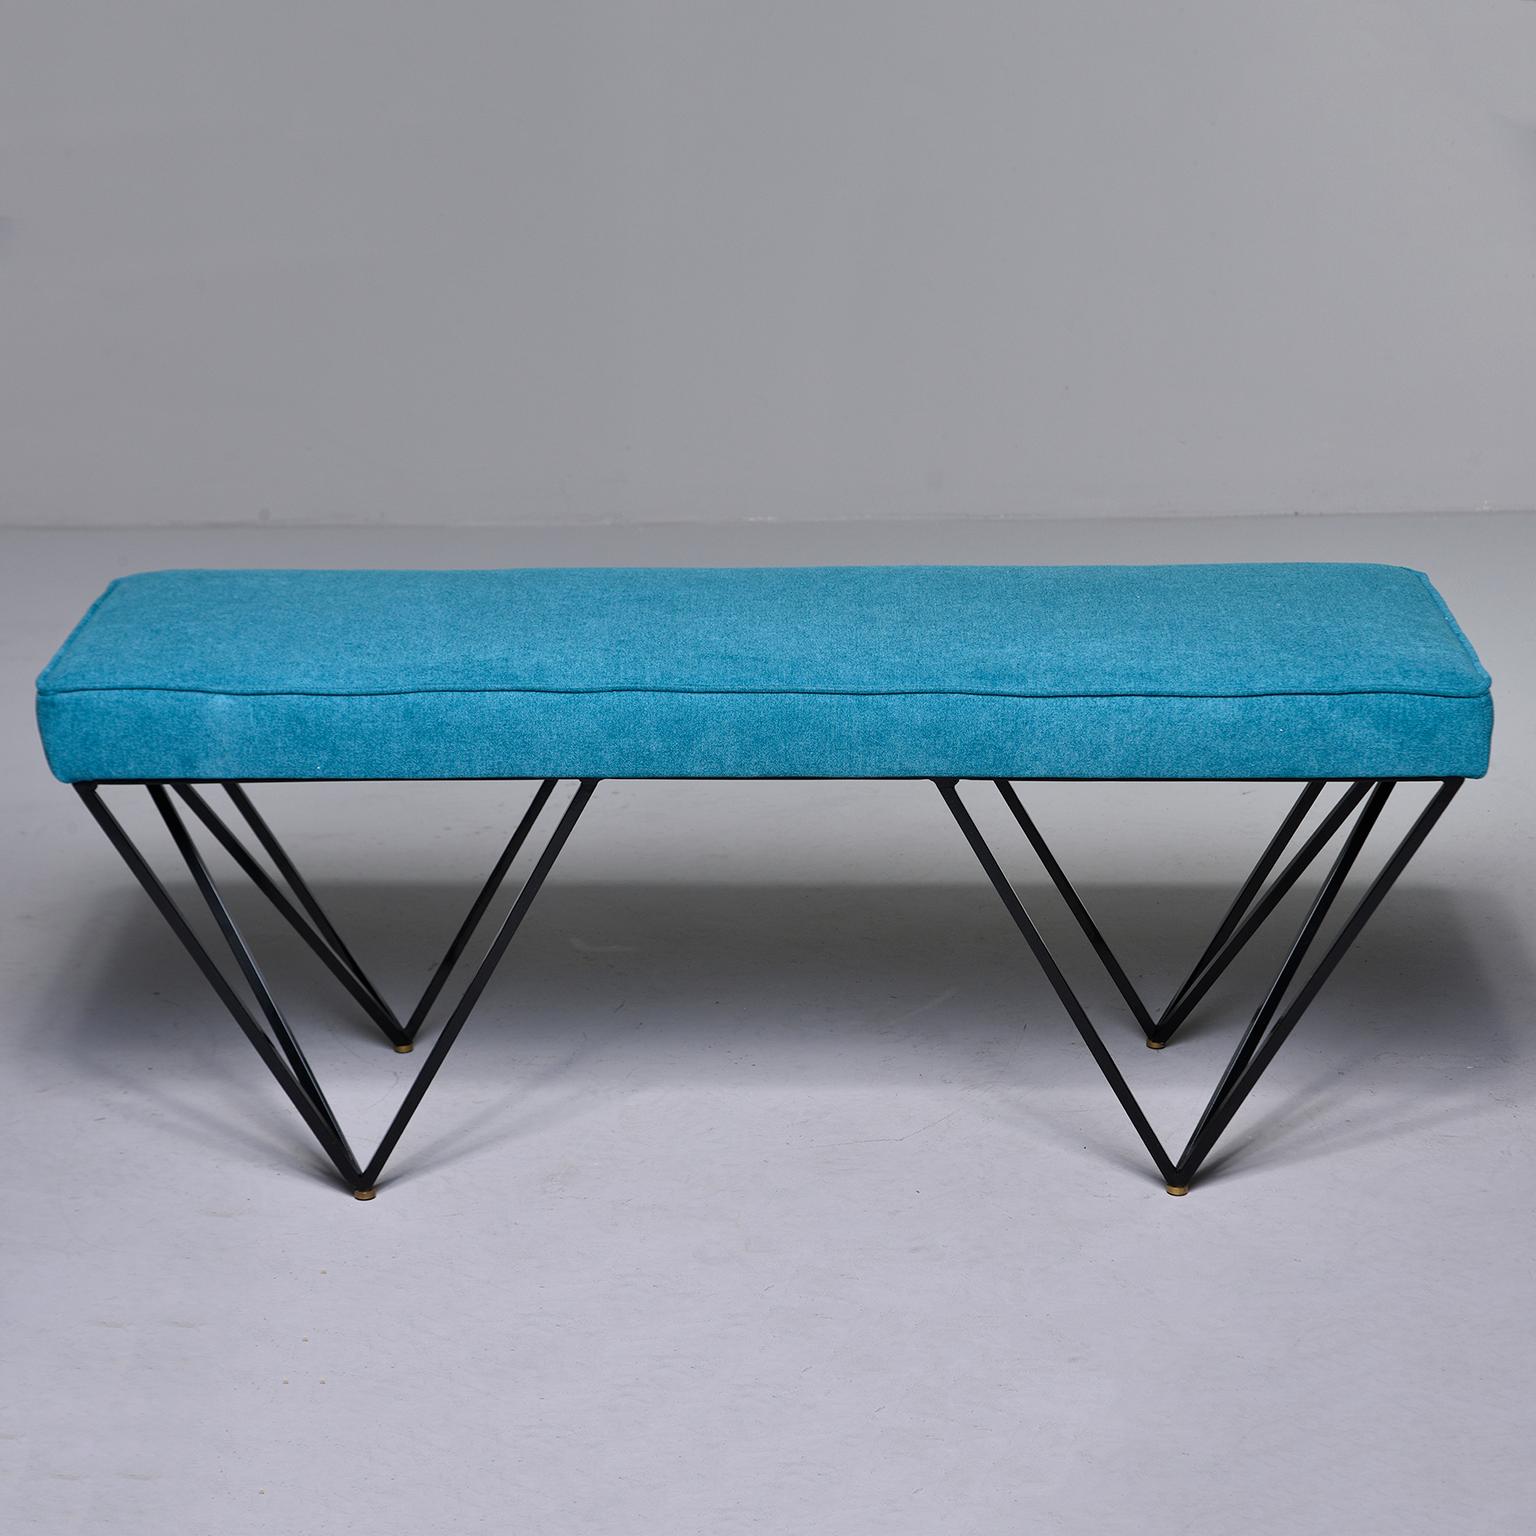 Italian midcentury style bench has black enameled metal base with open triangular form legs and brass feet. Upholstered in teal green chenille. Unknown maker.